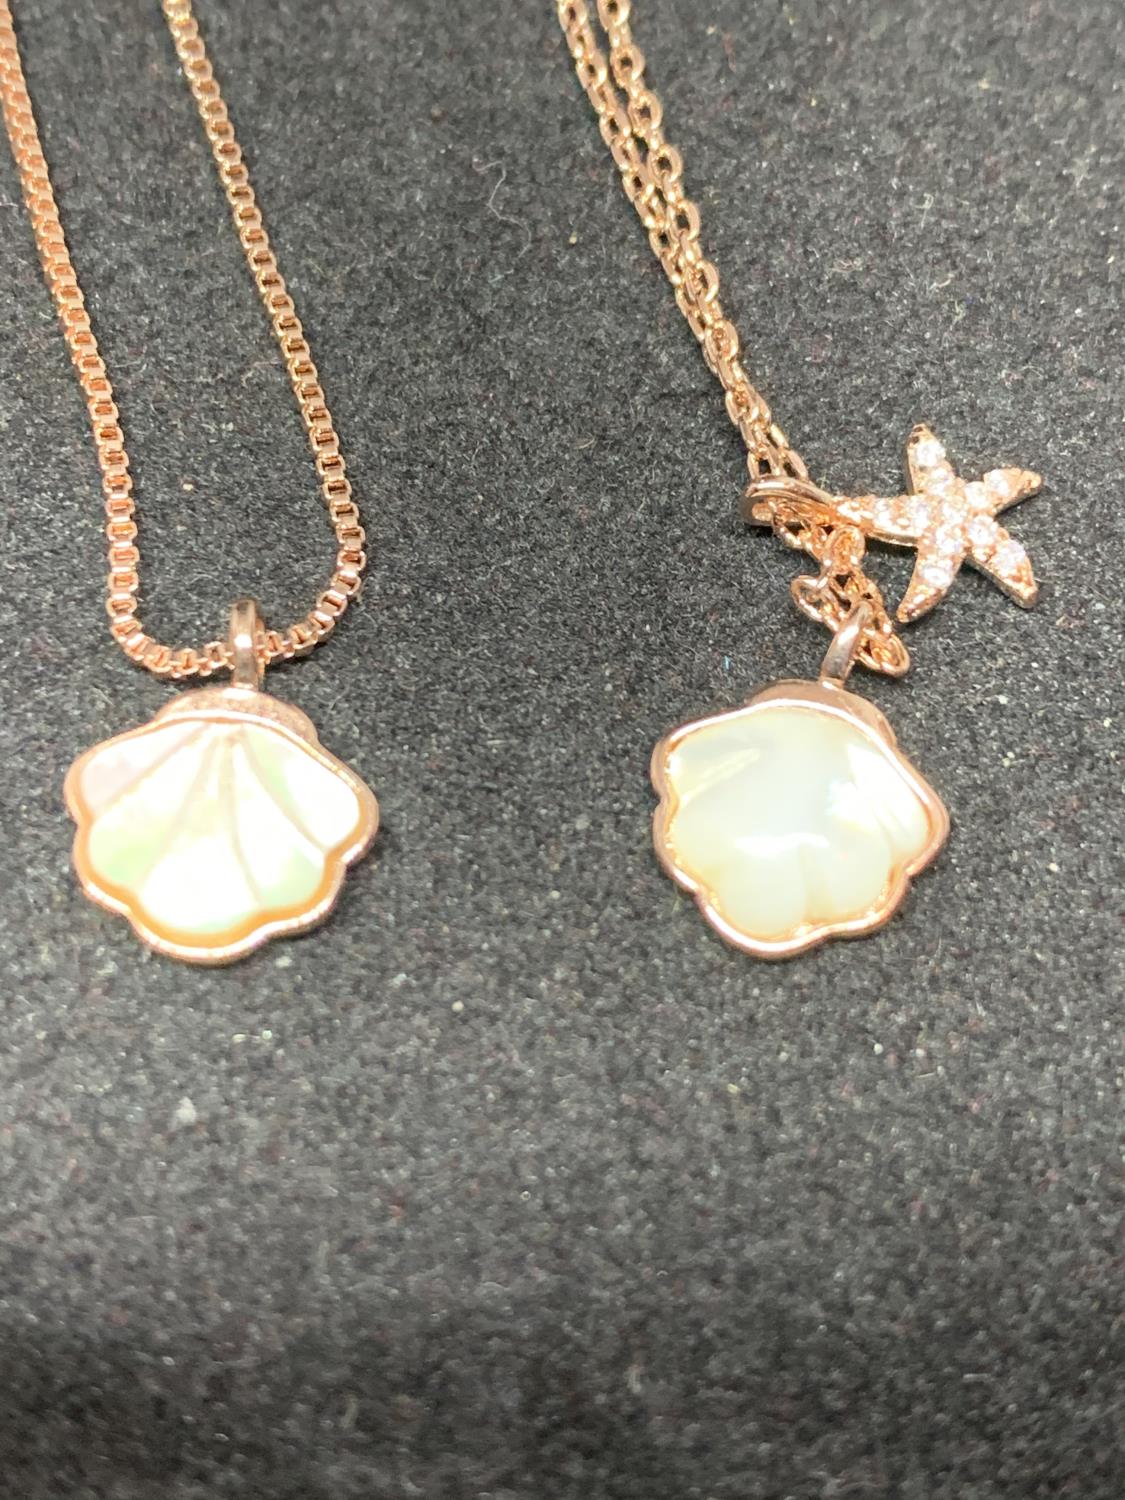 FOUR SILVER NECKLACES MARKED 925 WITH ROSE COLOURED GILDING WITH SHELL AND STAR FISH PENDANTS - Image 4 of 8